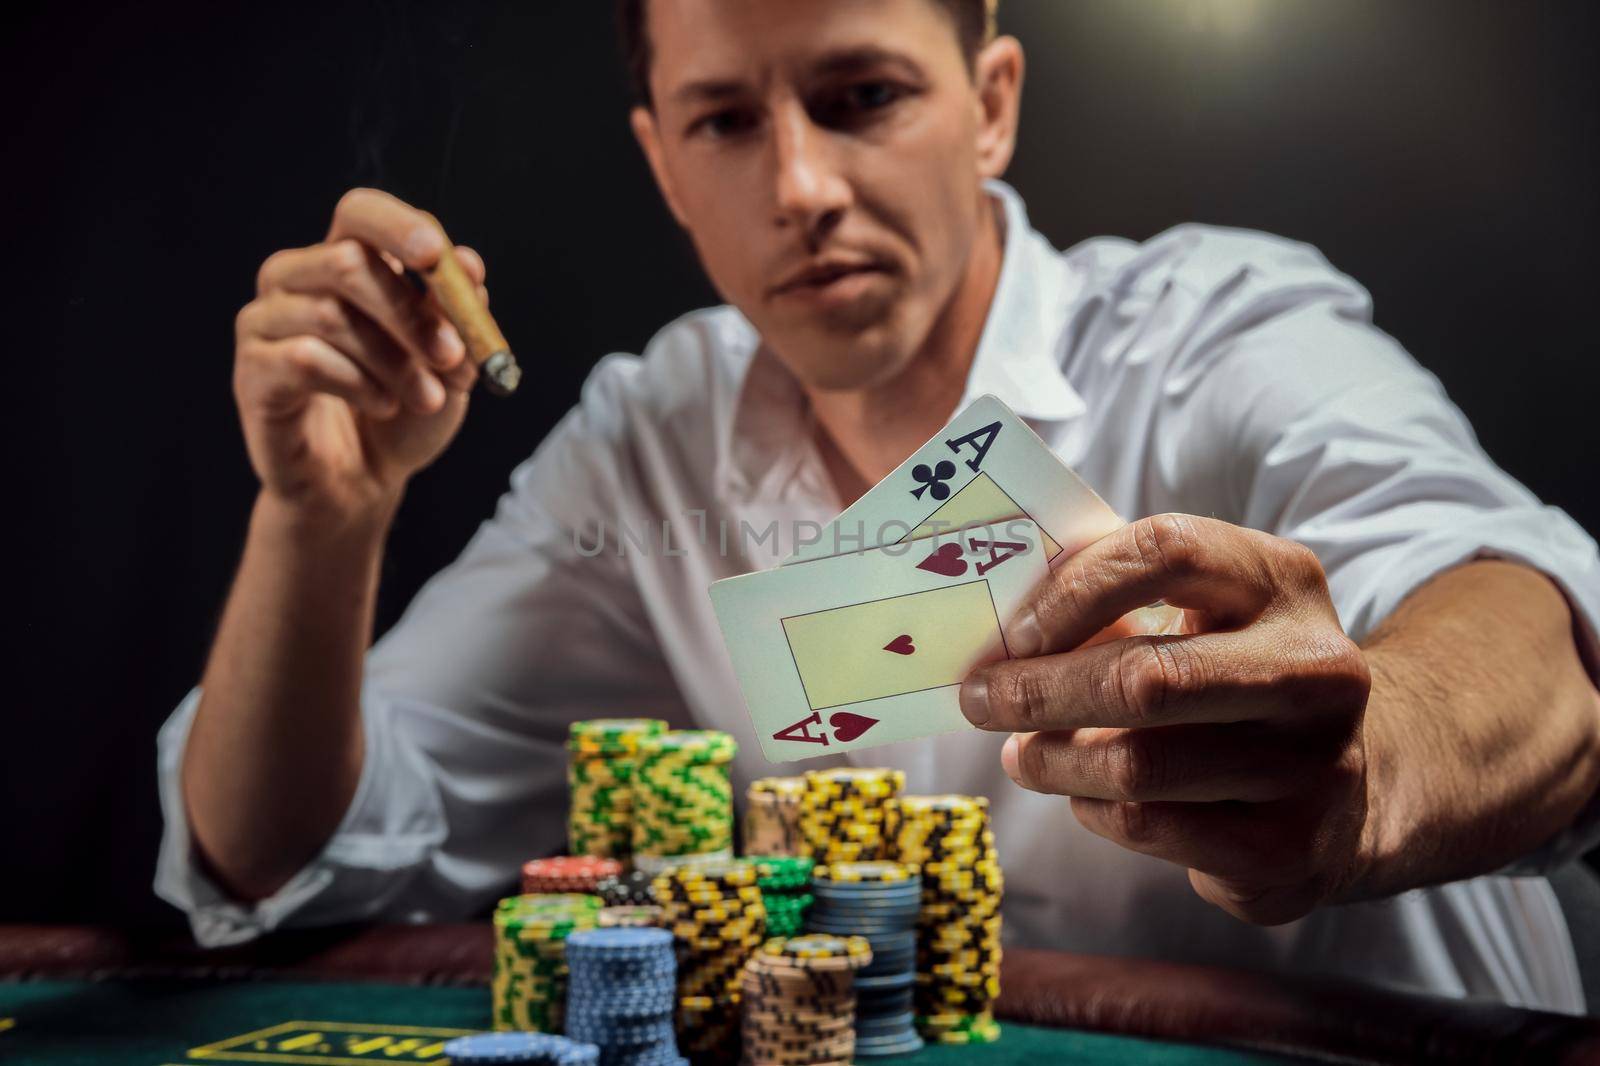 Athletic guy in a white shirt is playing poker sitting at the table at casino in smoke, against a white spotlight. He rejoicing his victory and smoking a cigar while showing two aces in his hand. Gambling addiction. Sincere emotions and entertainment concept.